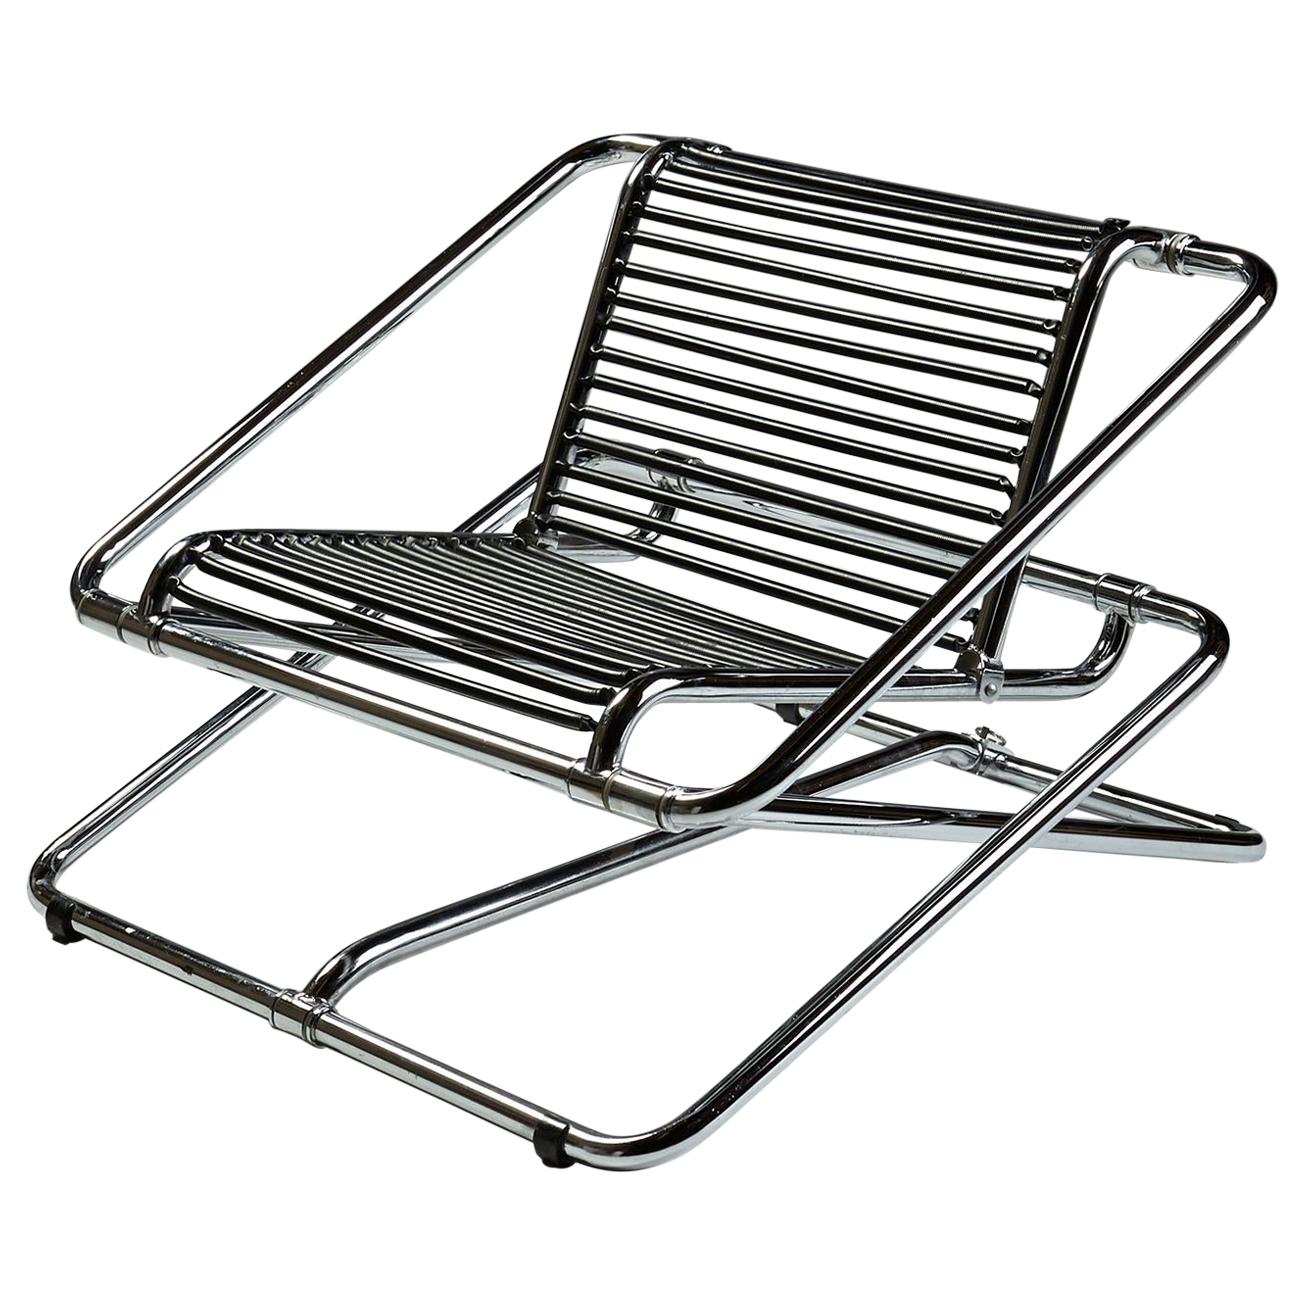 Rocking Chair, Designed by Ron Arad for One Off, England, 1980s